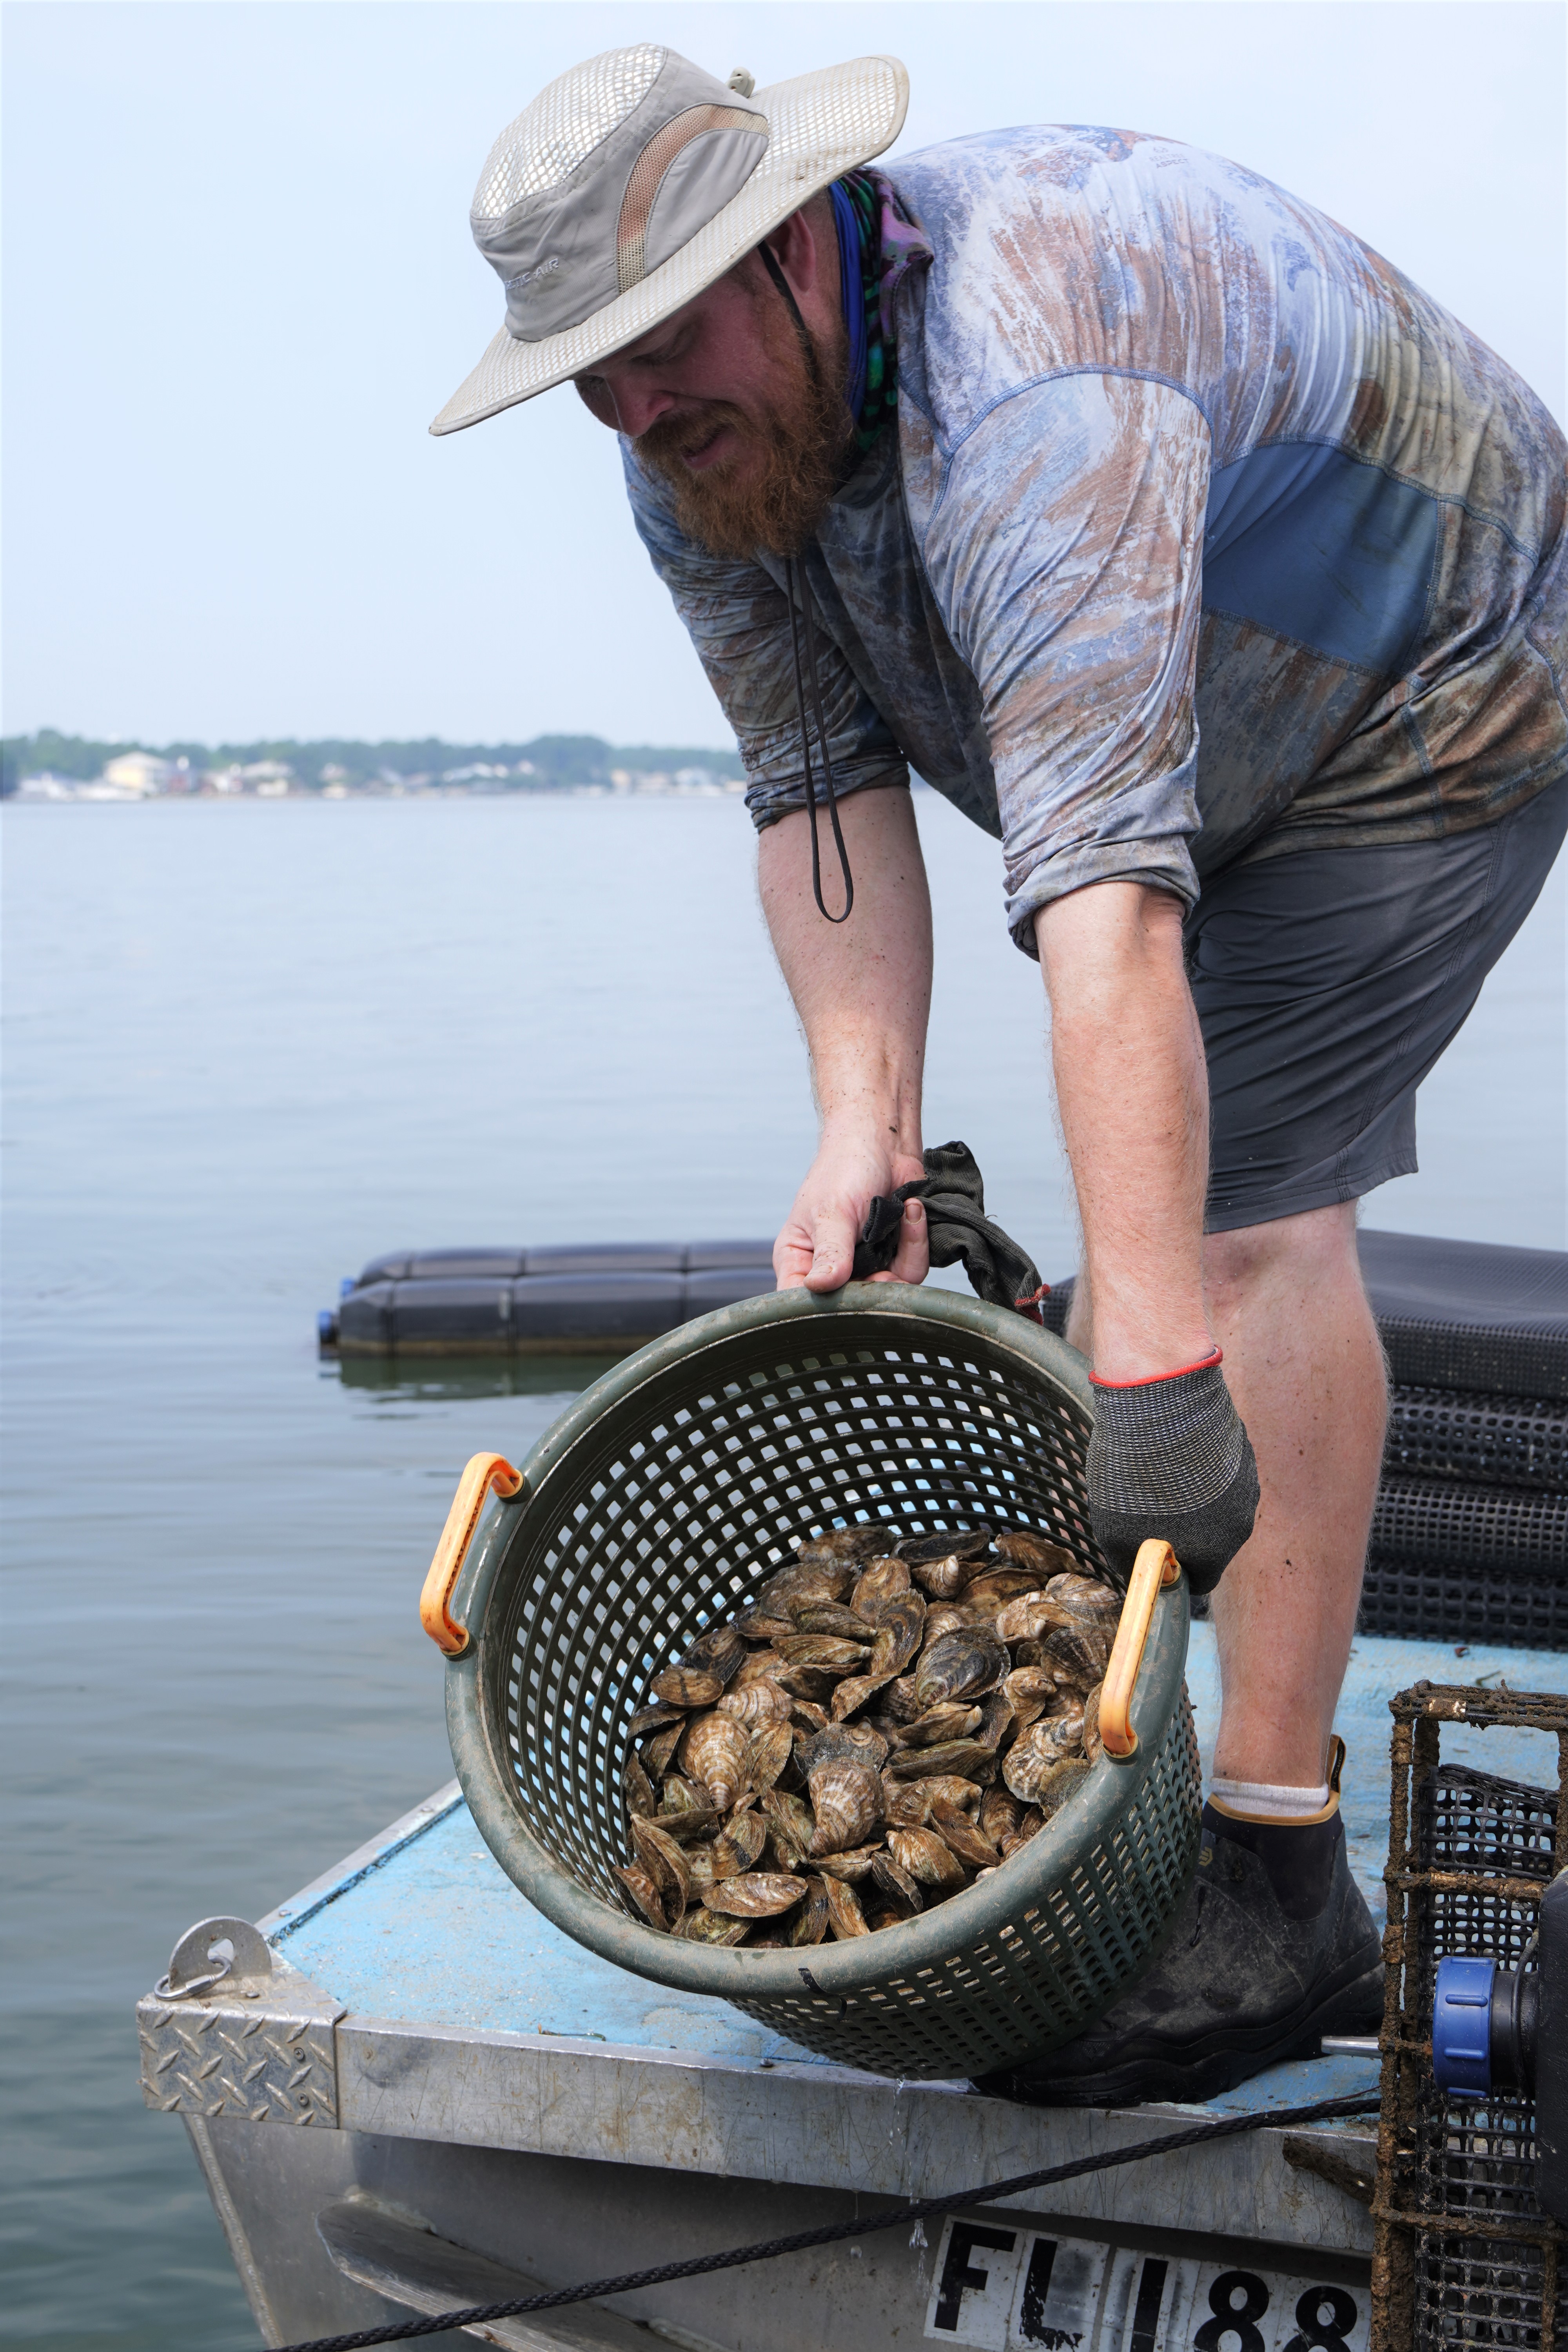 Oyster Farmer with basket of oysters